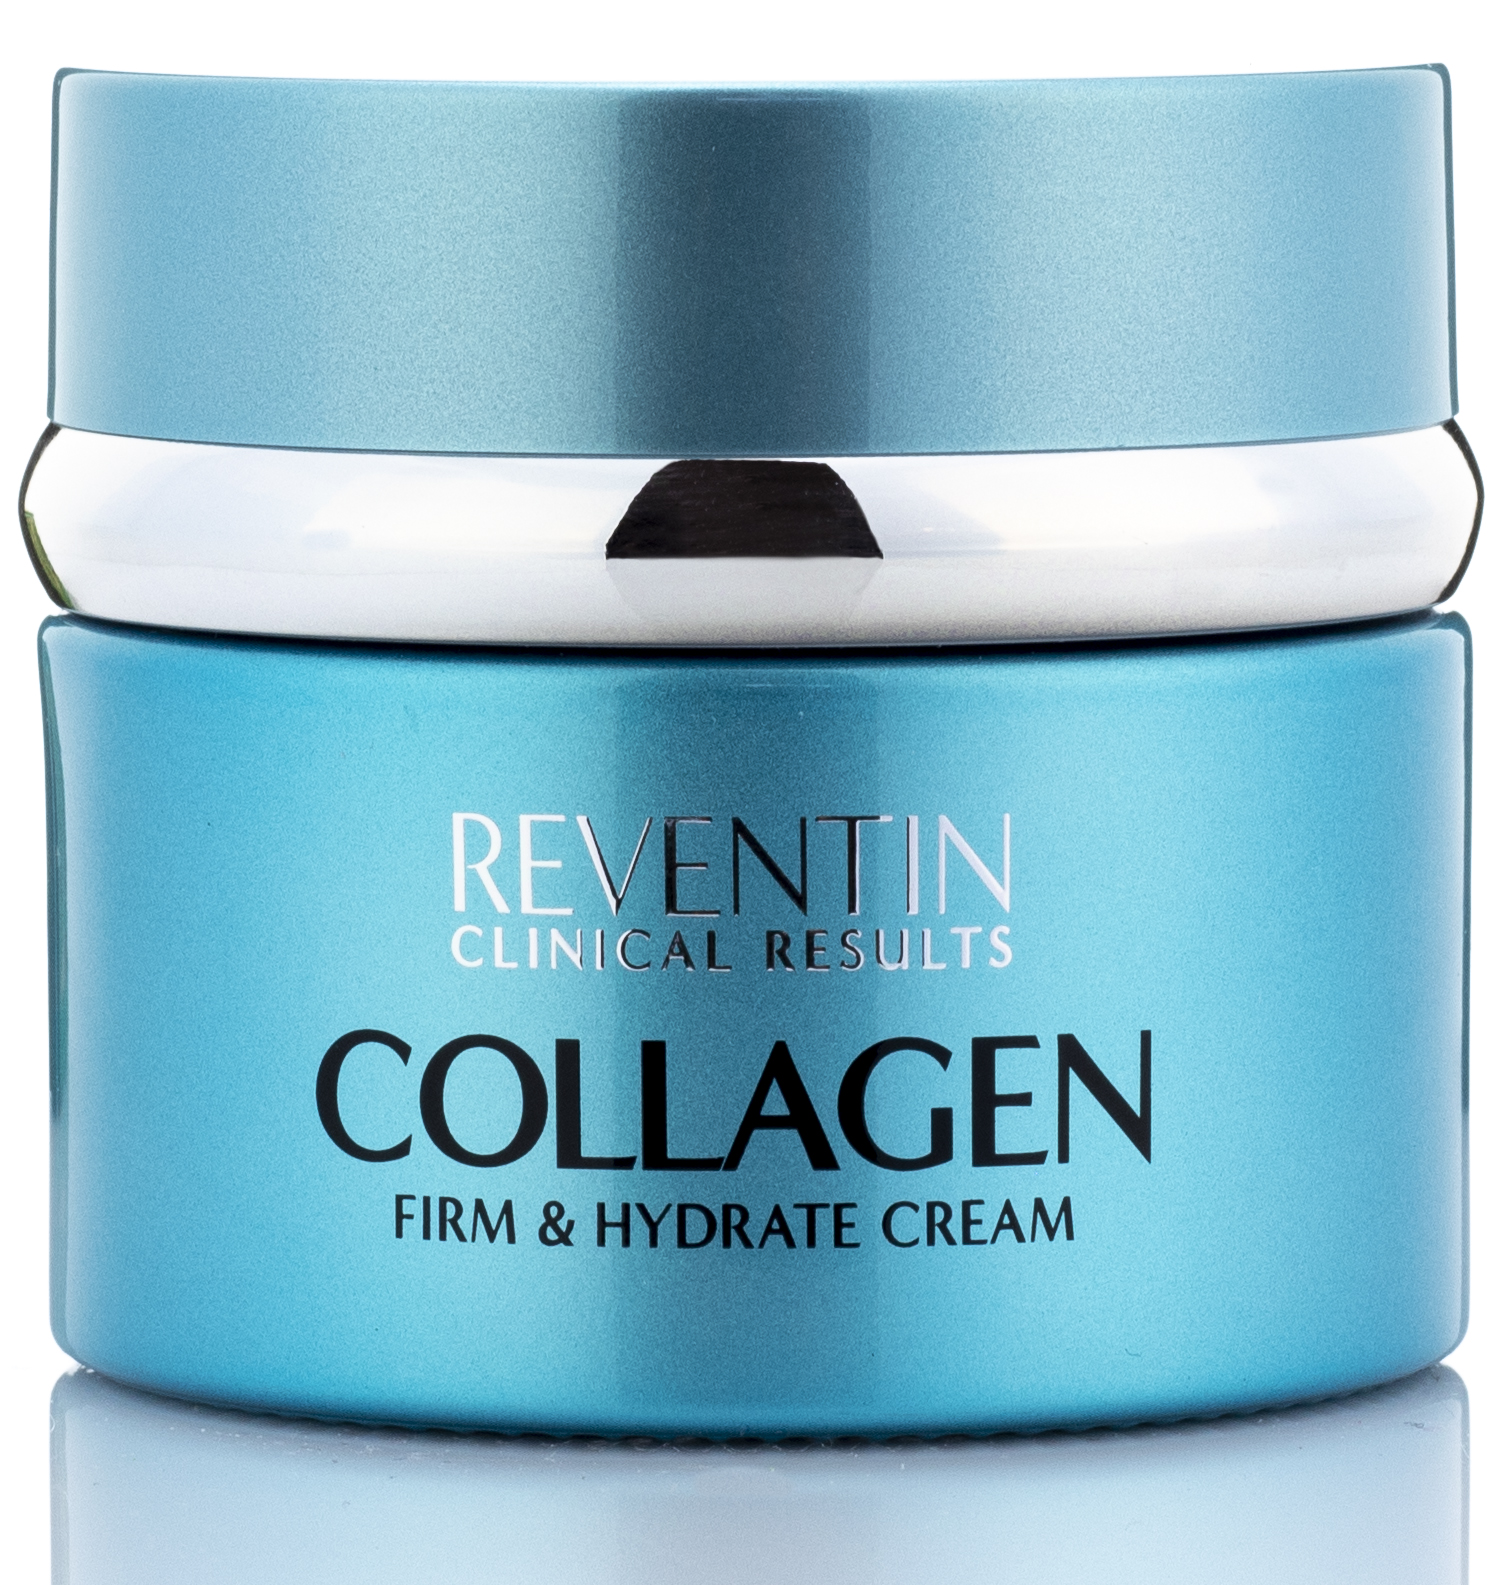 Reventin Clinical Results Collagen Cream Targets Wrinkles, Lines, and Texture. Firming Facial Moisturizer with Peptides. 1.5 fl oz - image 1 of 4